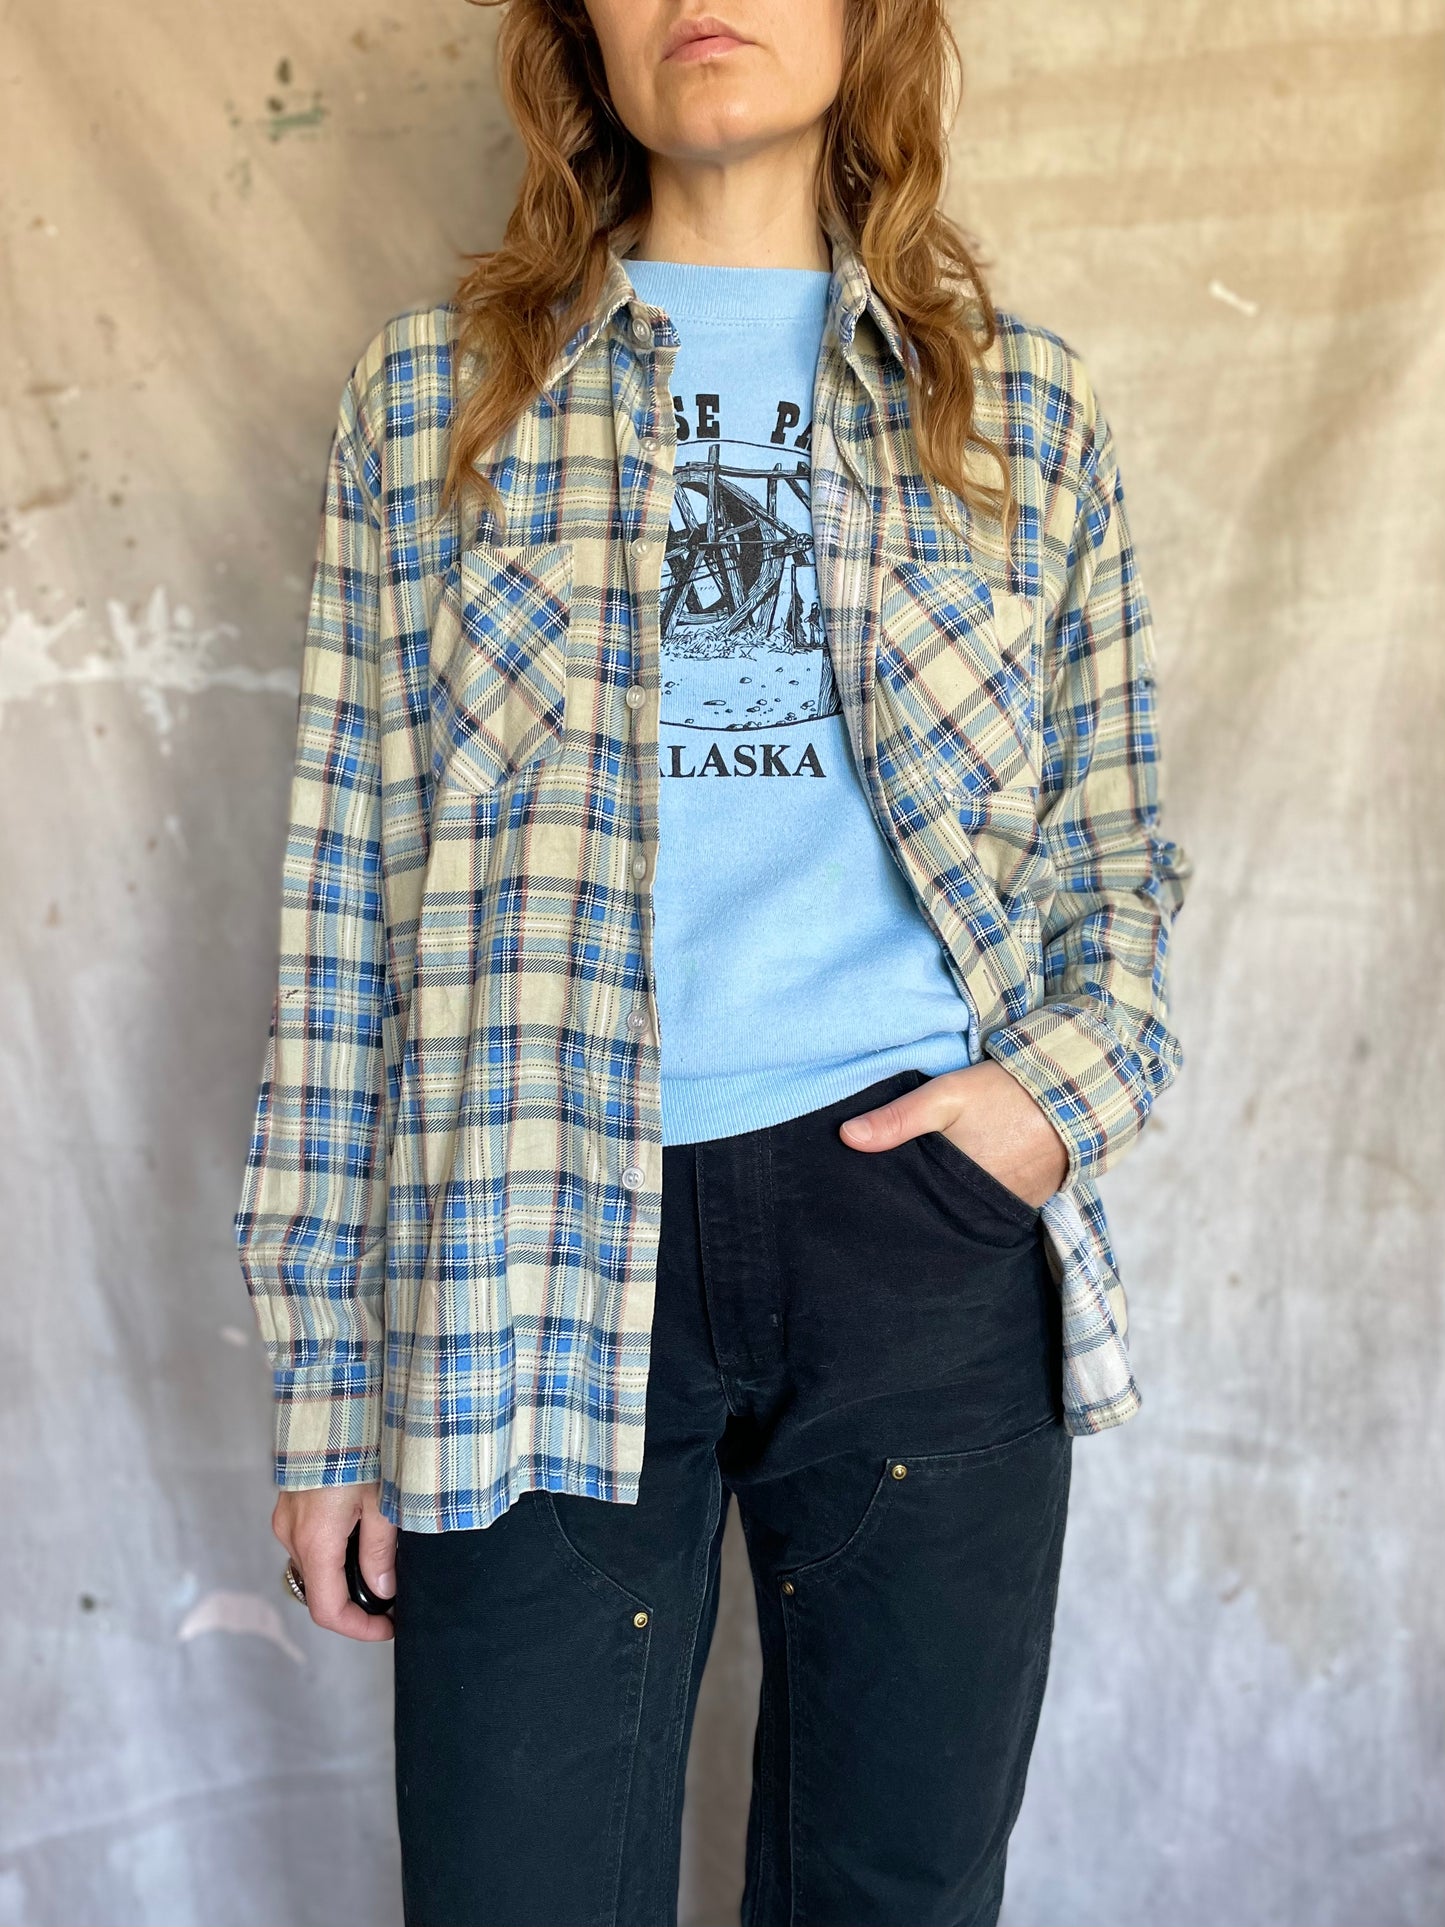 80s/90s Flannel Shirt